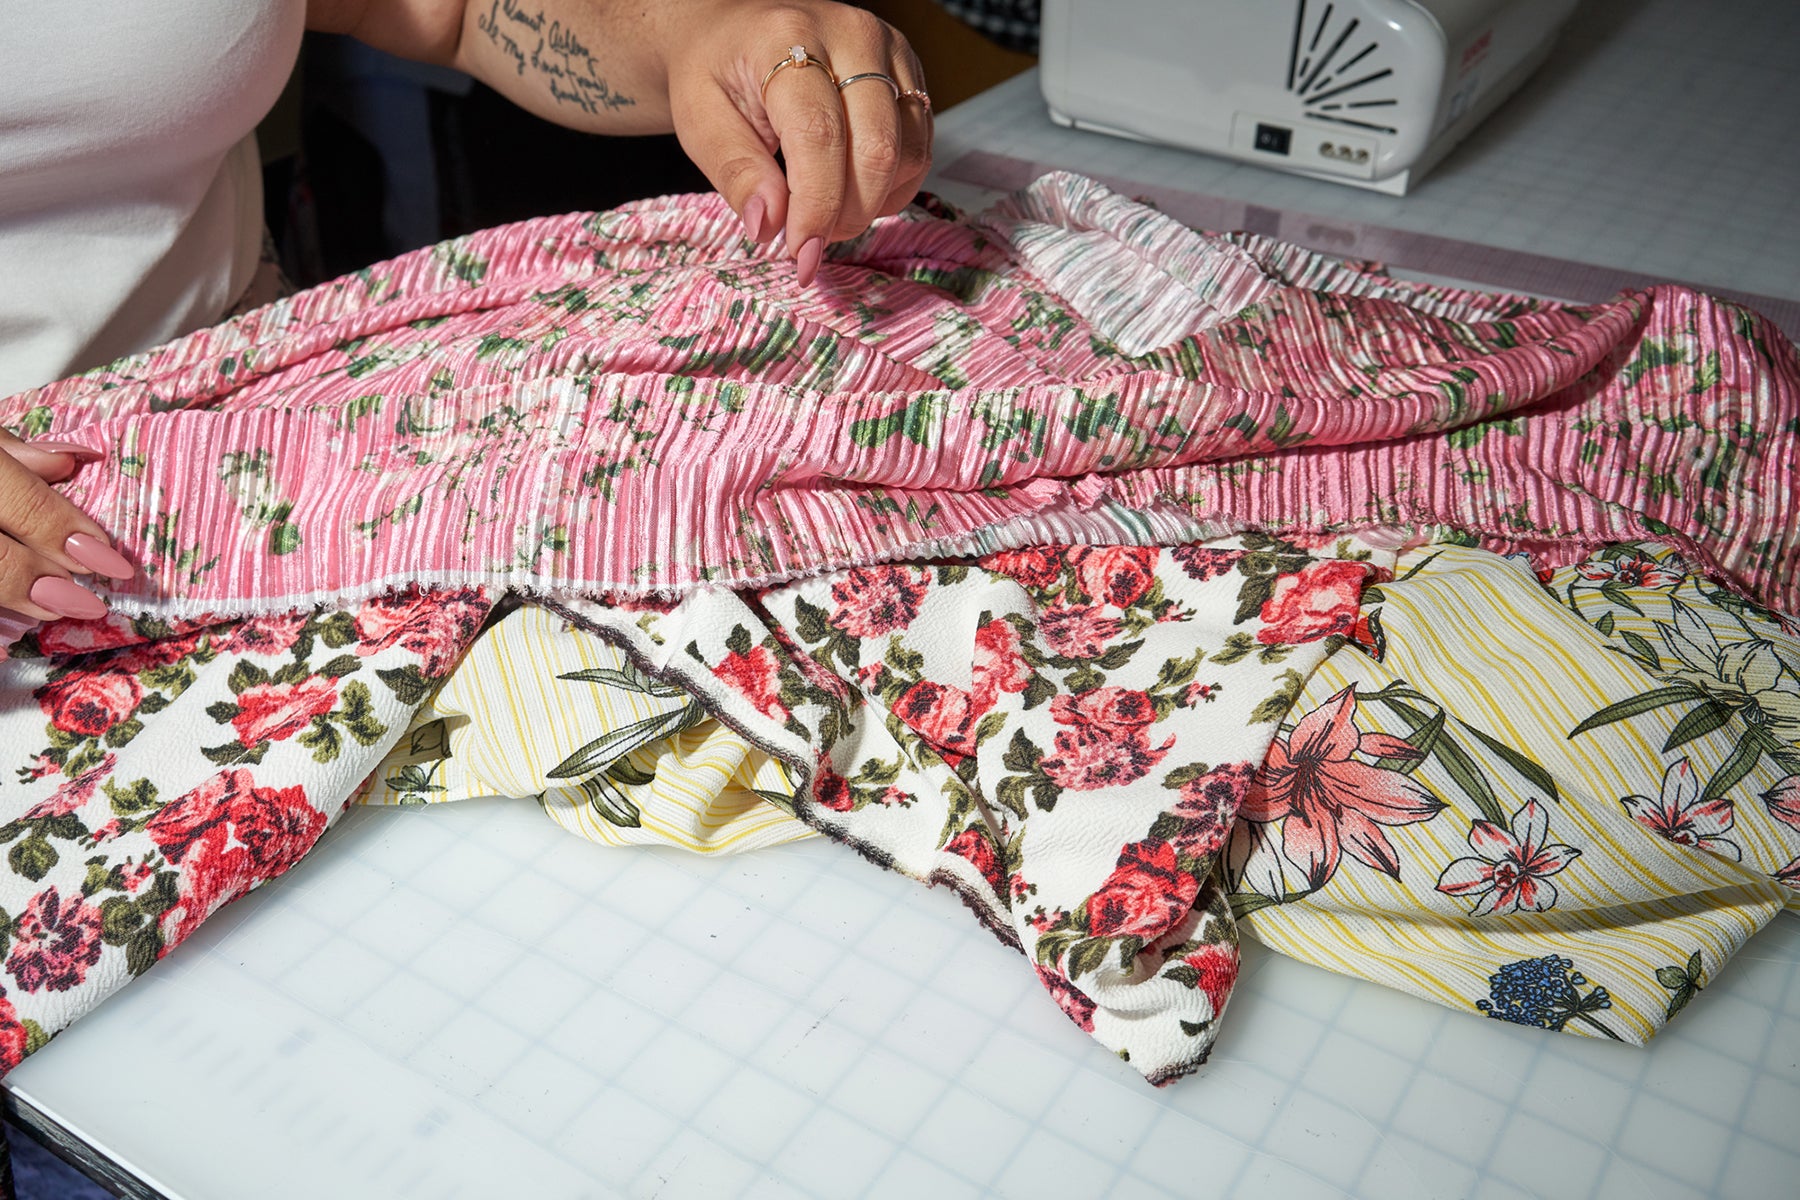 Close up of plus fashion designer Ashley Nell Tipton's hands, working with pink, floral fabric.